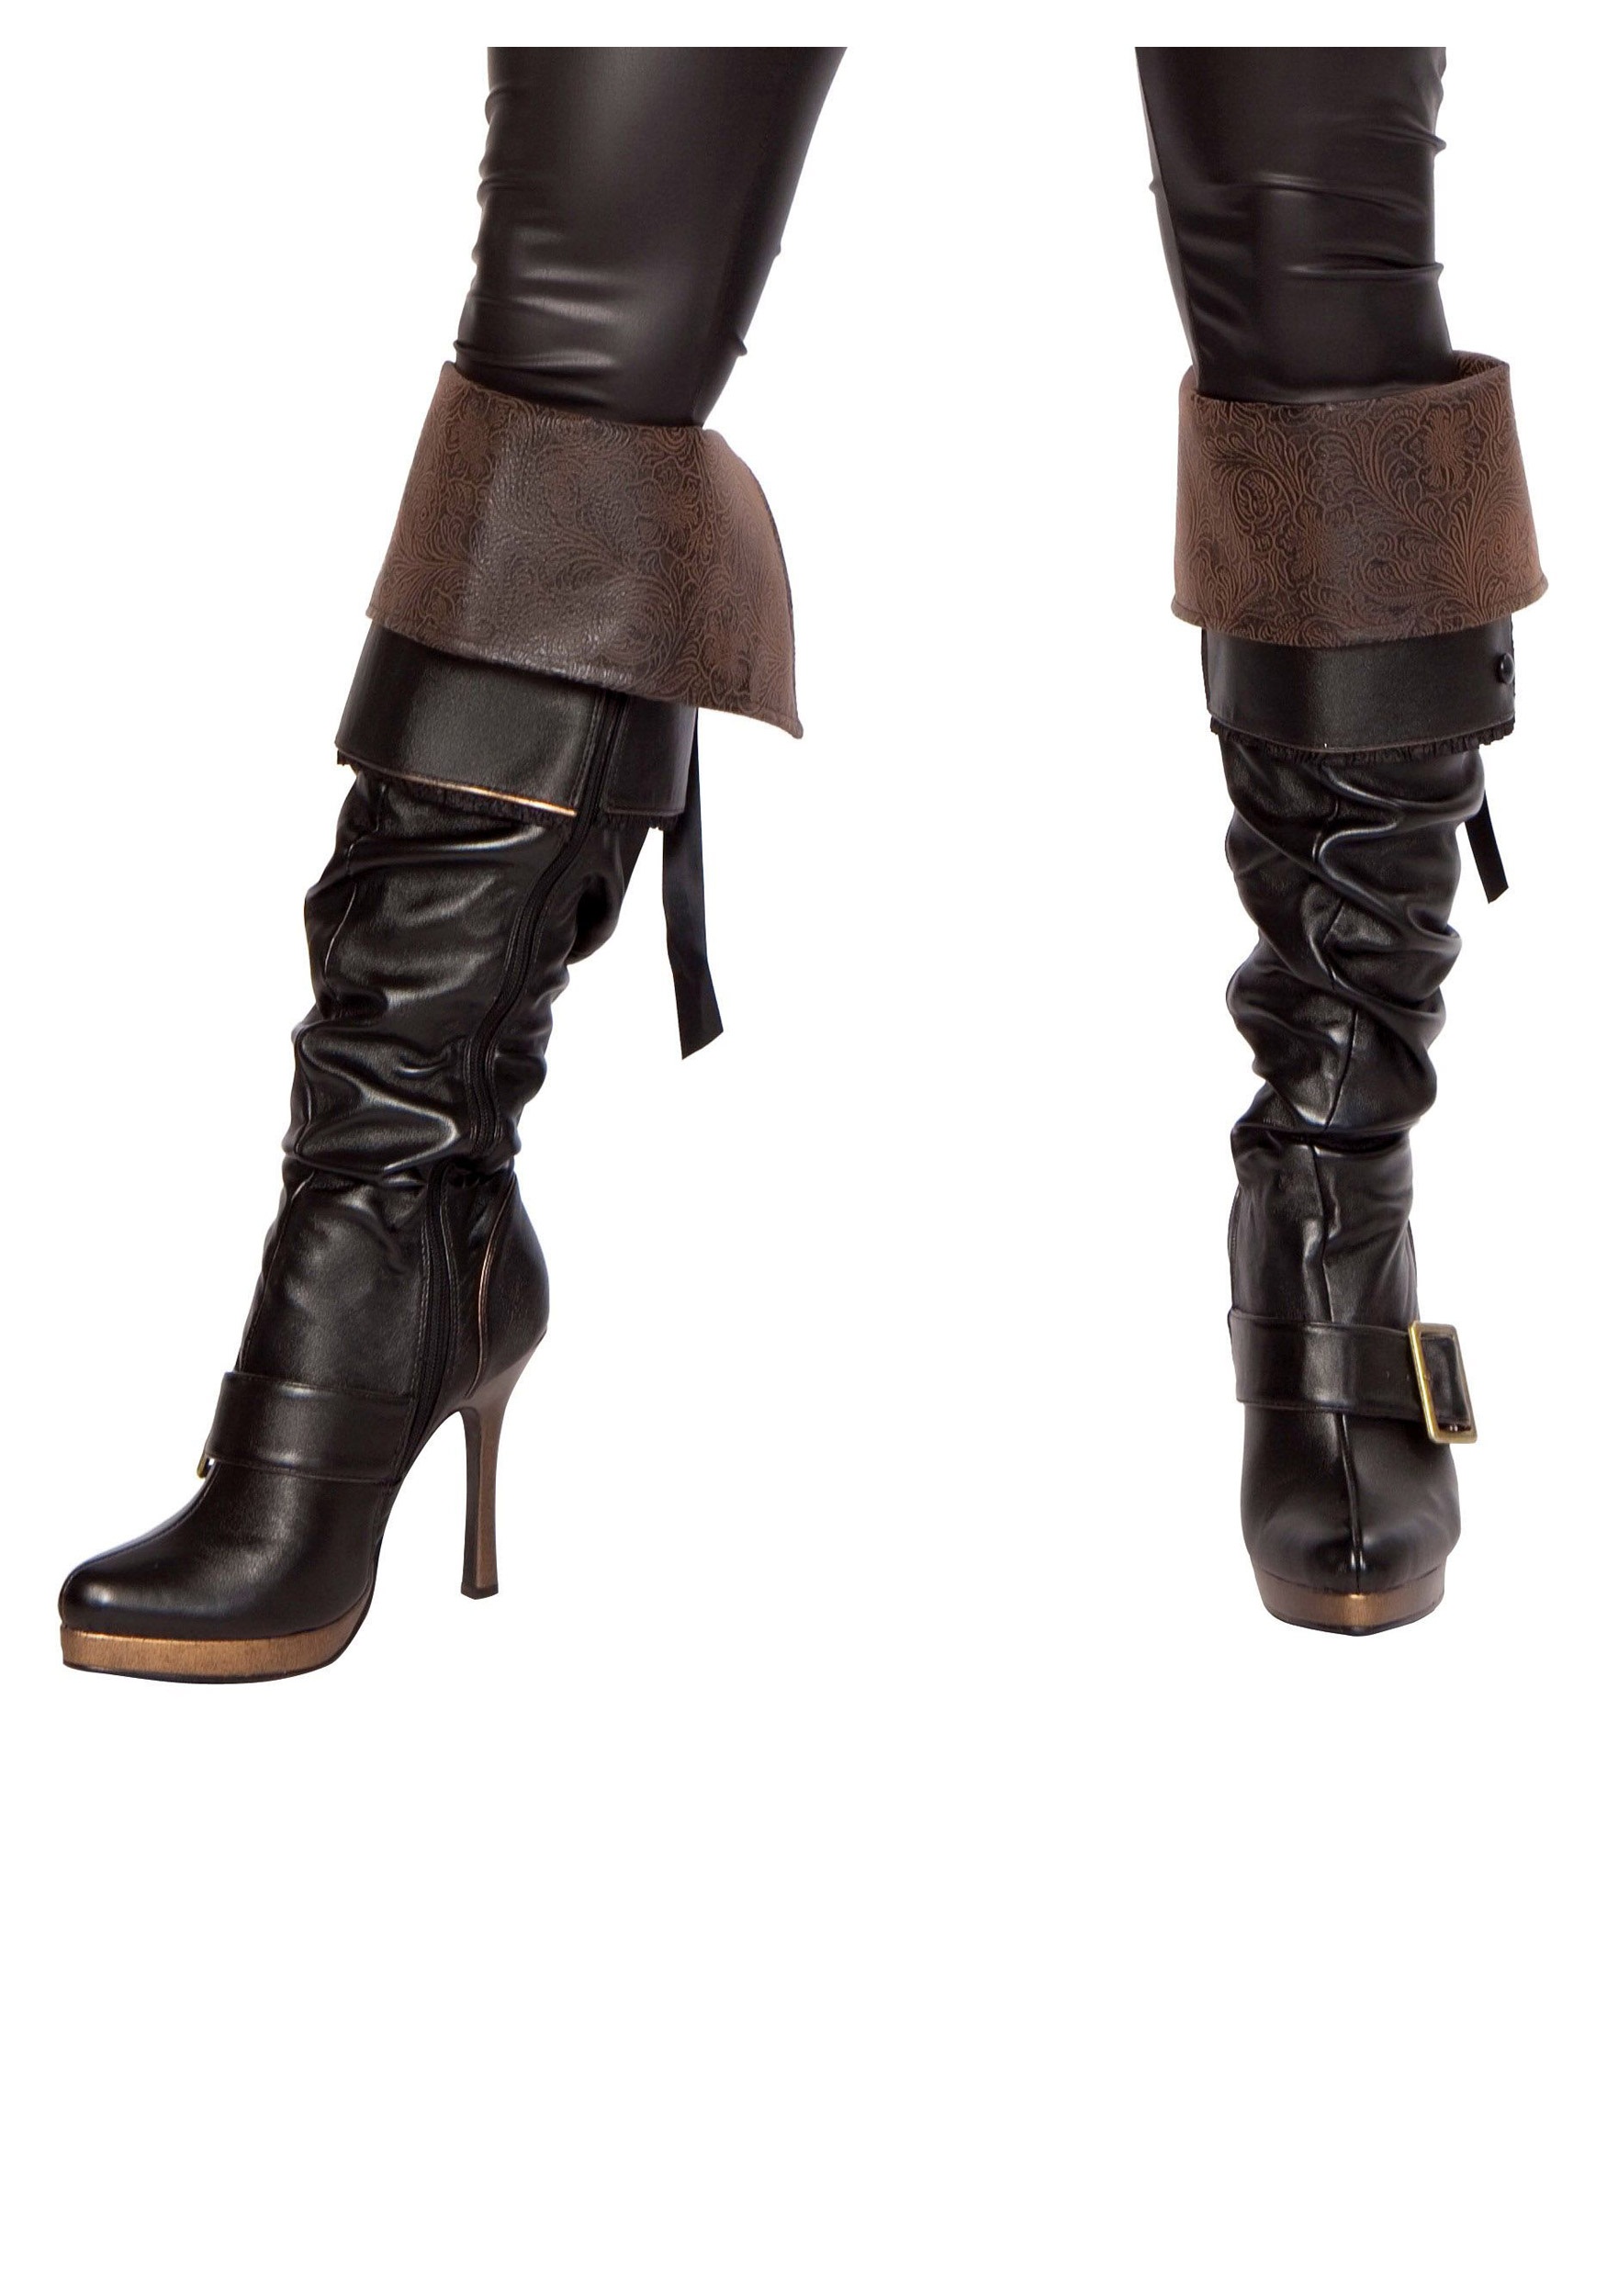 womens pirate boot covers